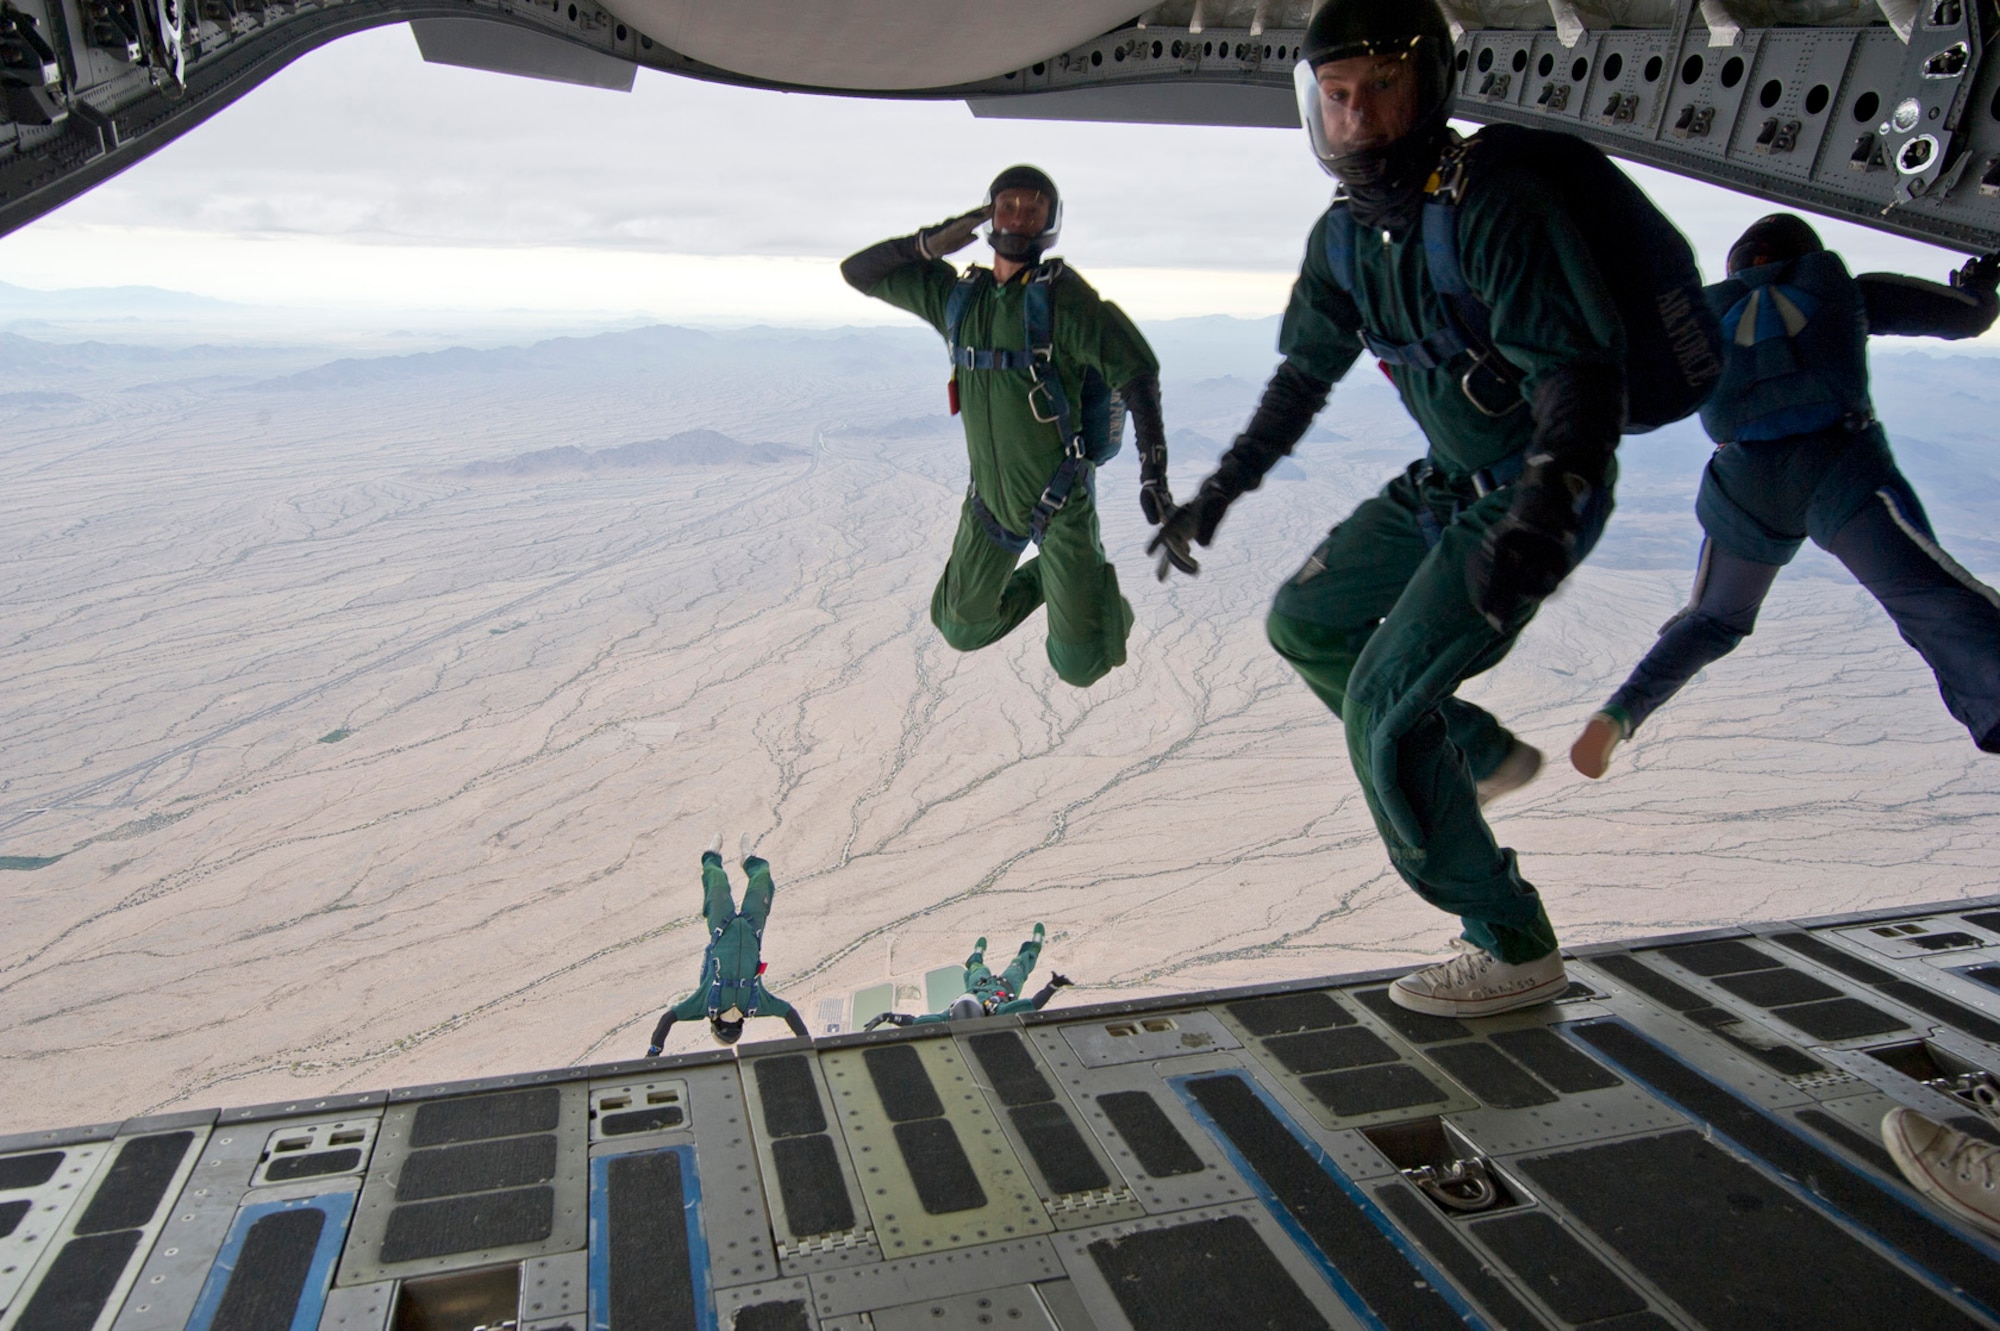 Members from the Wings of Blue and Wings of Green parachute team, depart a Charleston-based C-17 aircraft during their Spring Break training exercise over the Arizona desert. Citizen Airmen from the 701st Airlift Squadron conducted airdrop training with the Wings of Blue, the U.S. Air Force's parachute team, April 1, 2017 in Phoenix, Ariz. (U.S. Air Force photo by TSgt. Bobby Pilch)